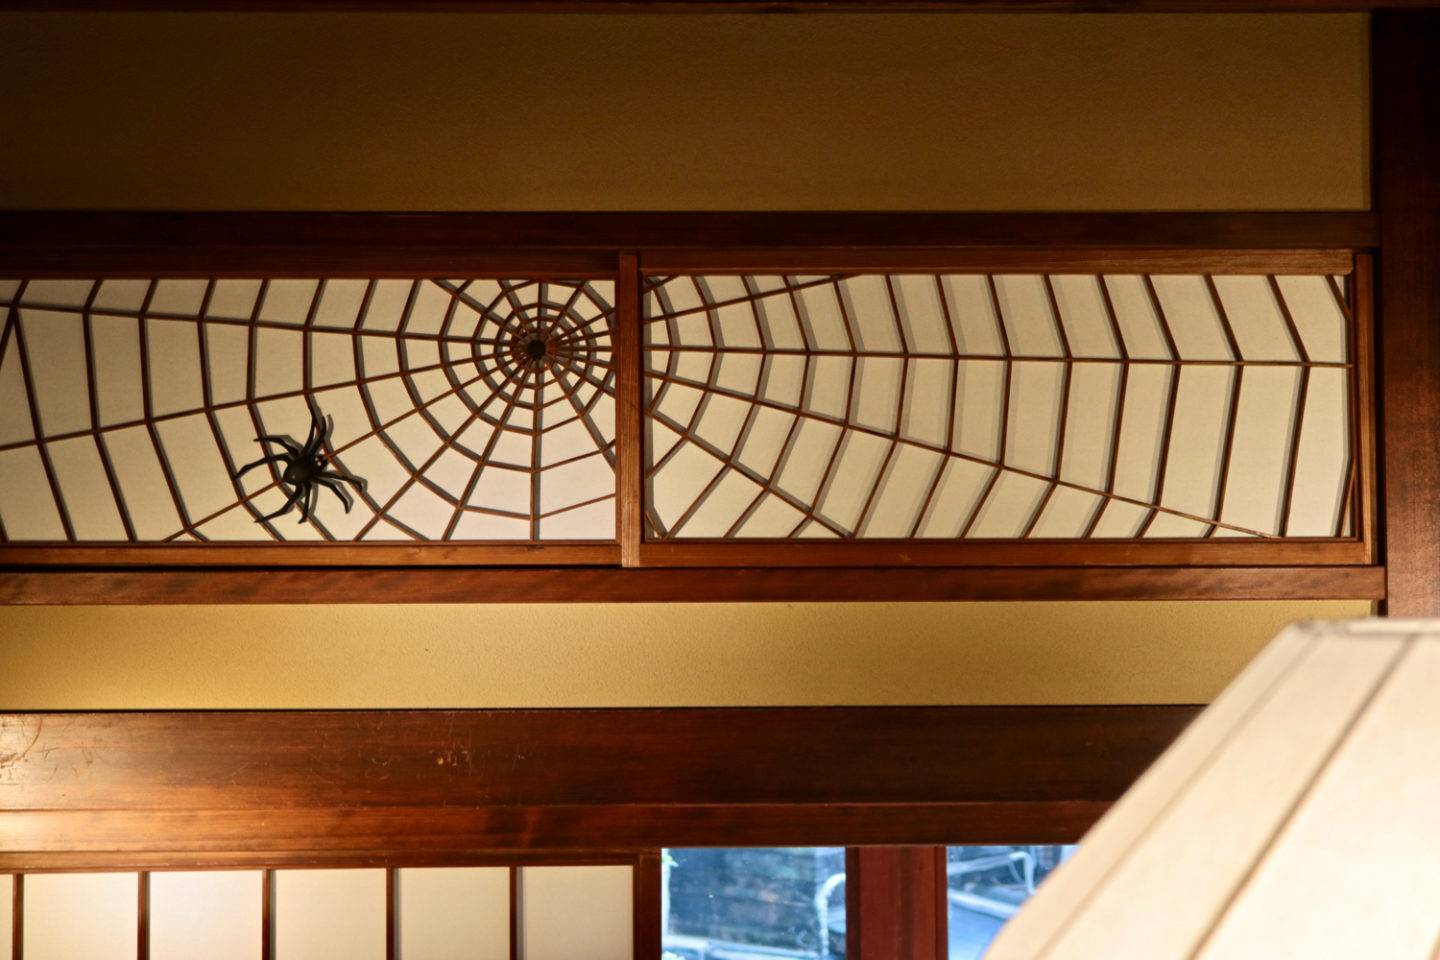 "Ranma" transom panels depicting spiders and spider webs